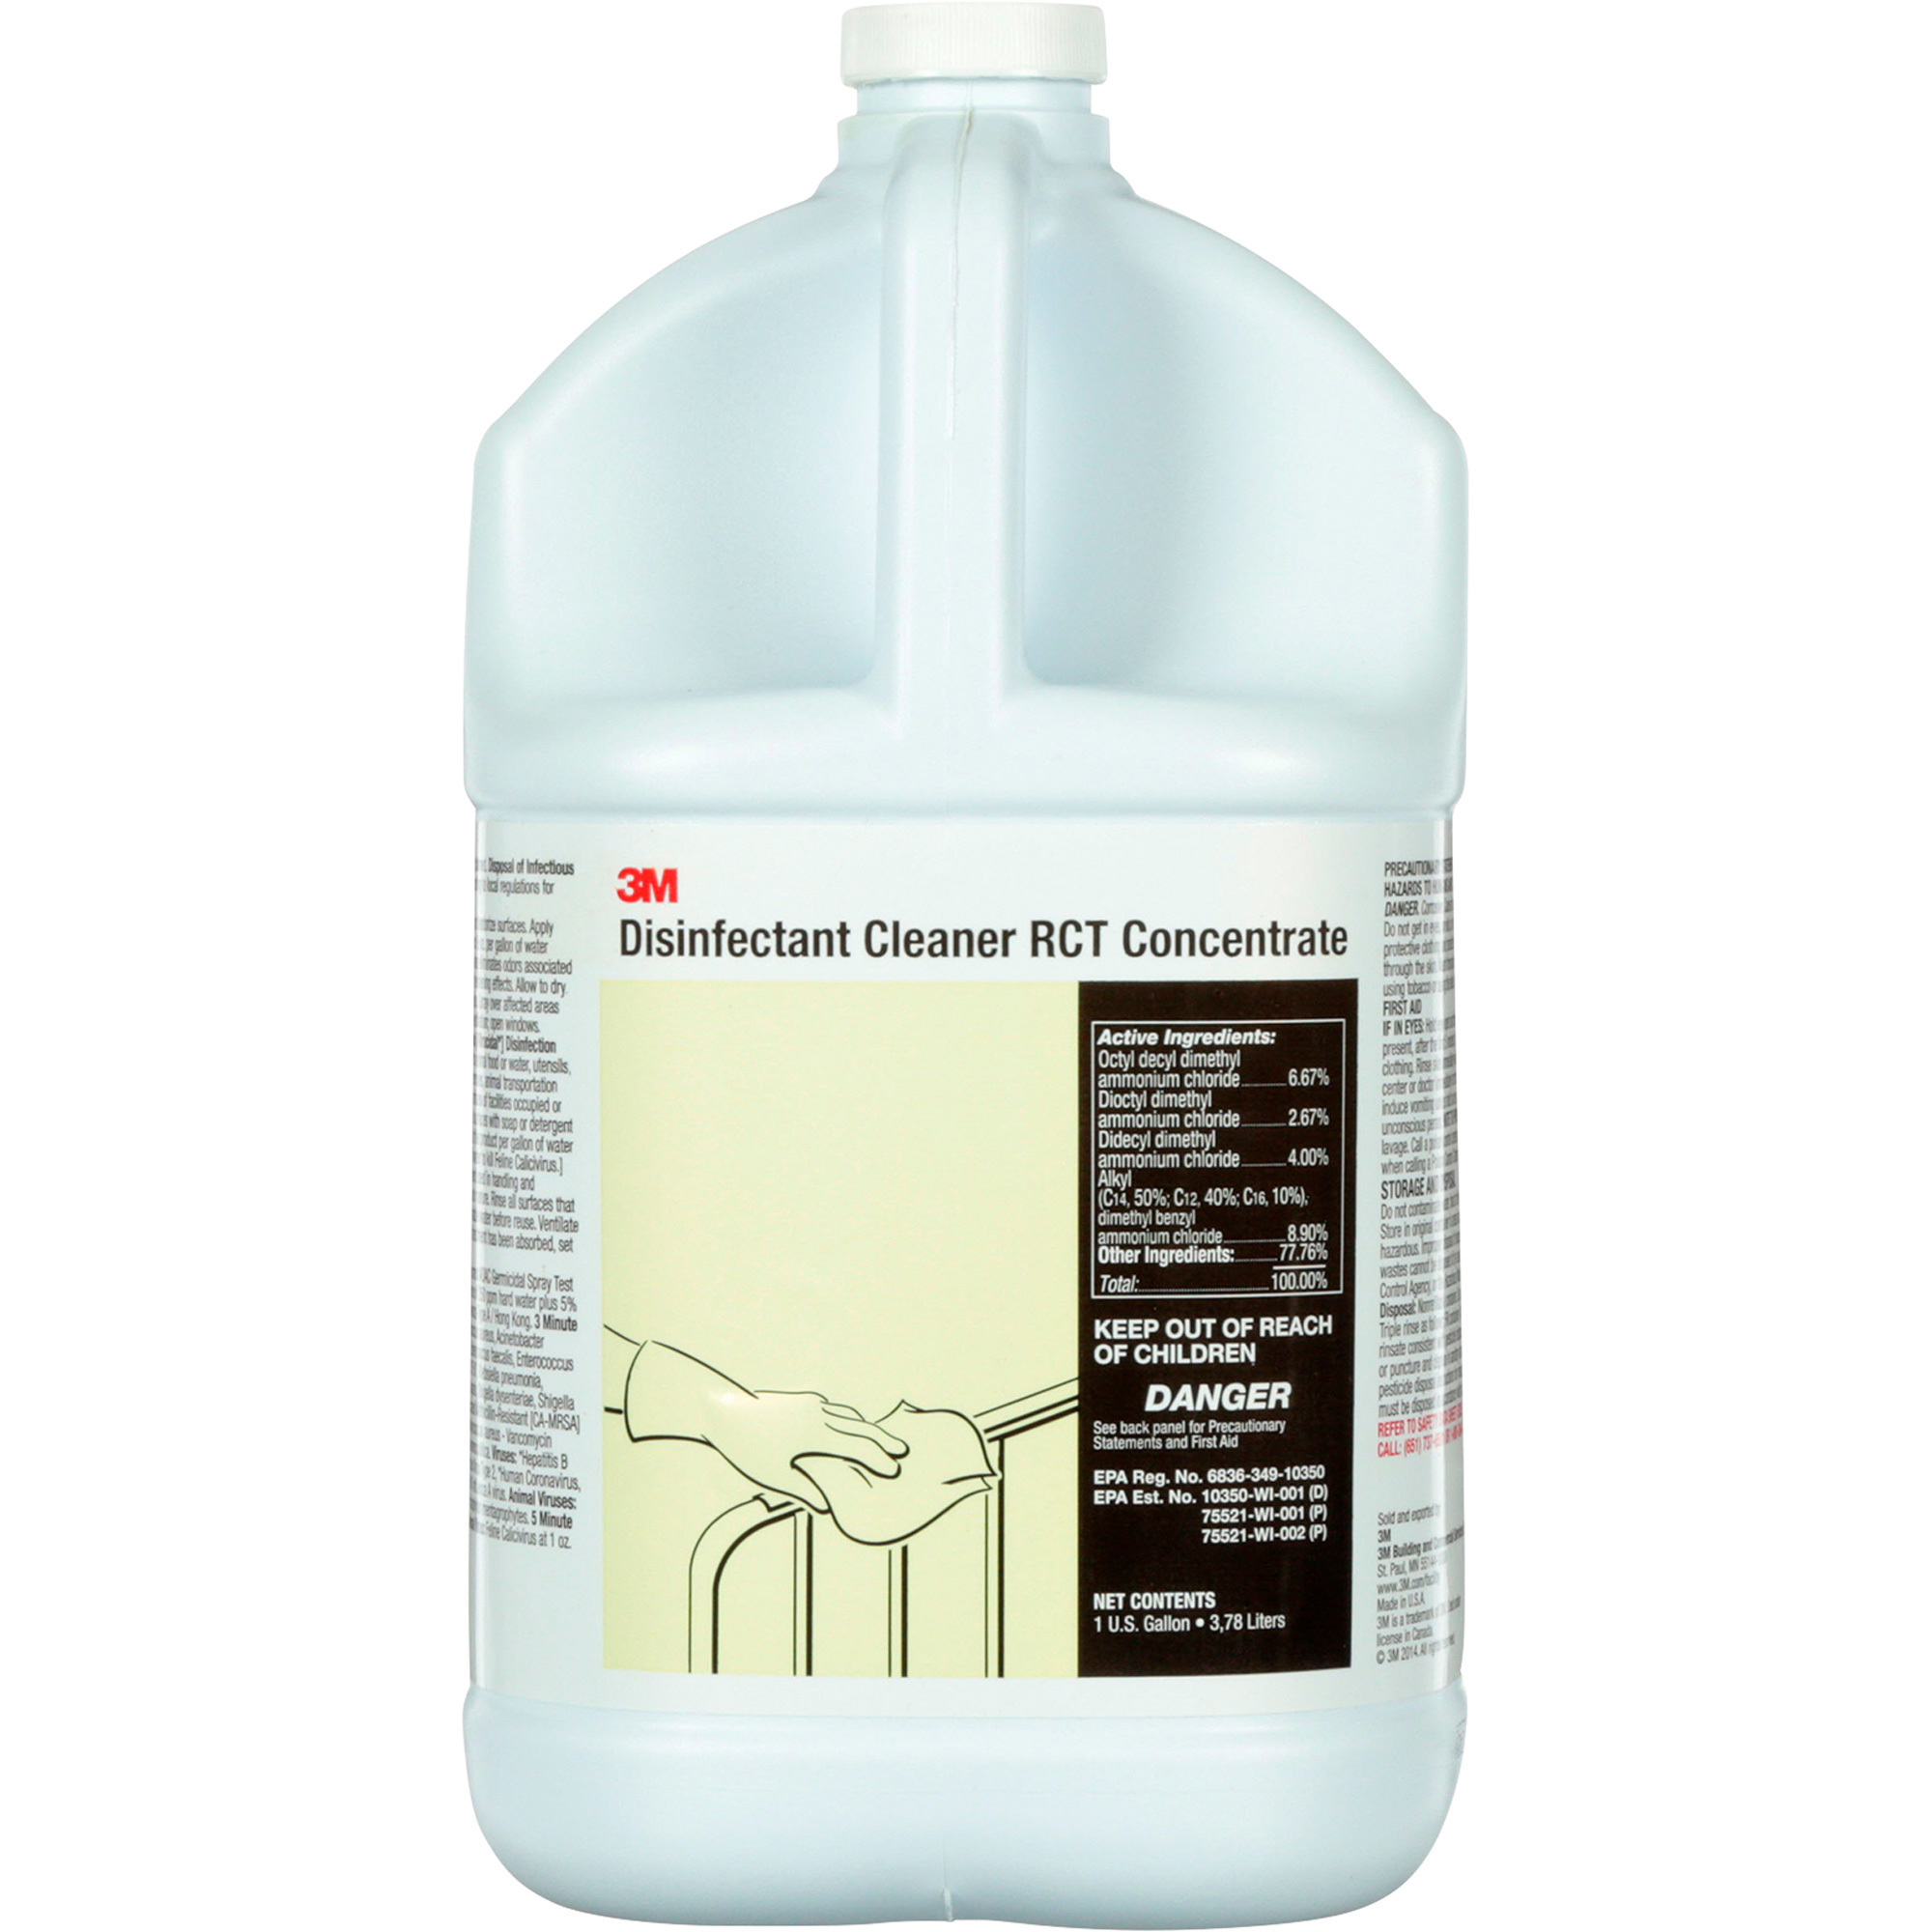 3M Disinfectant Cleaner RCT Concentrate, (4) 1-Gallon Bottles, Model 85785